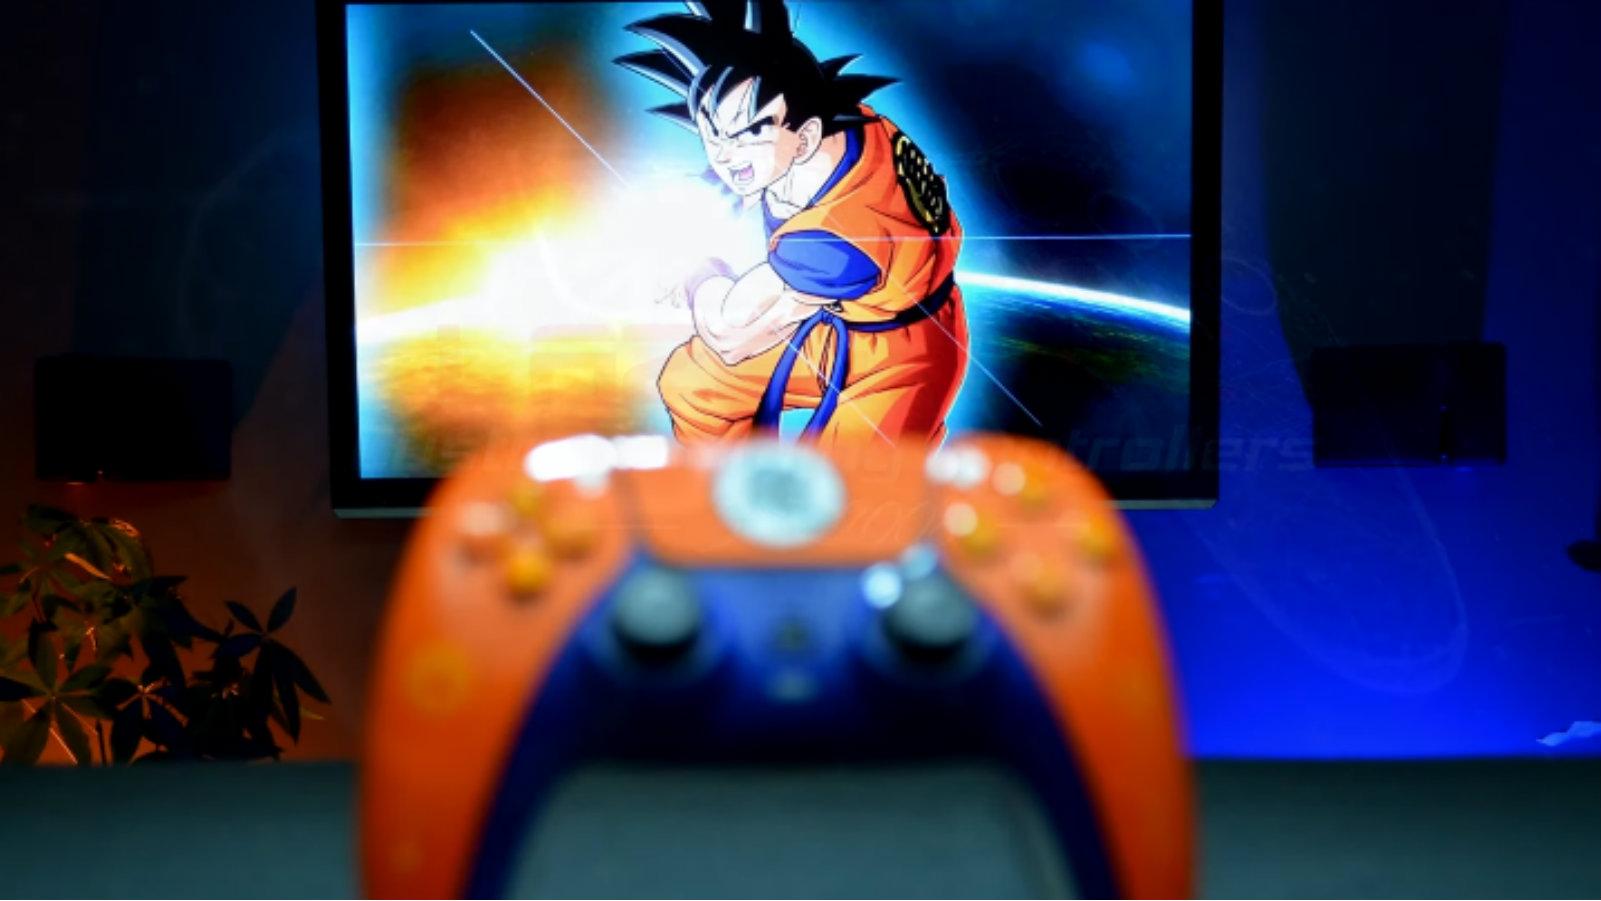 World's first custom PS5 controller revealed with Dragon Ball Z